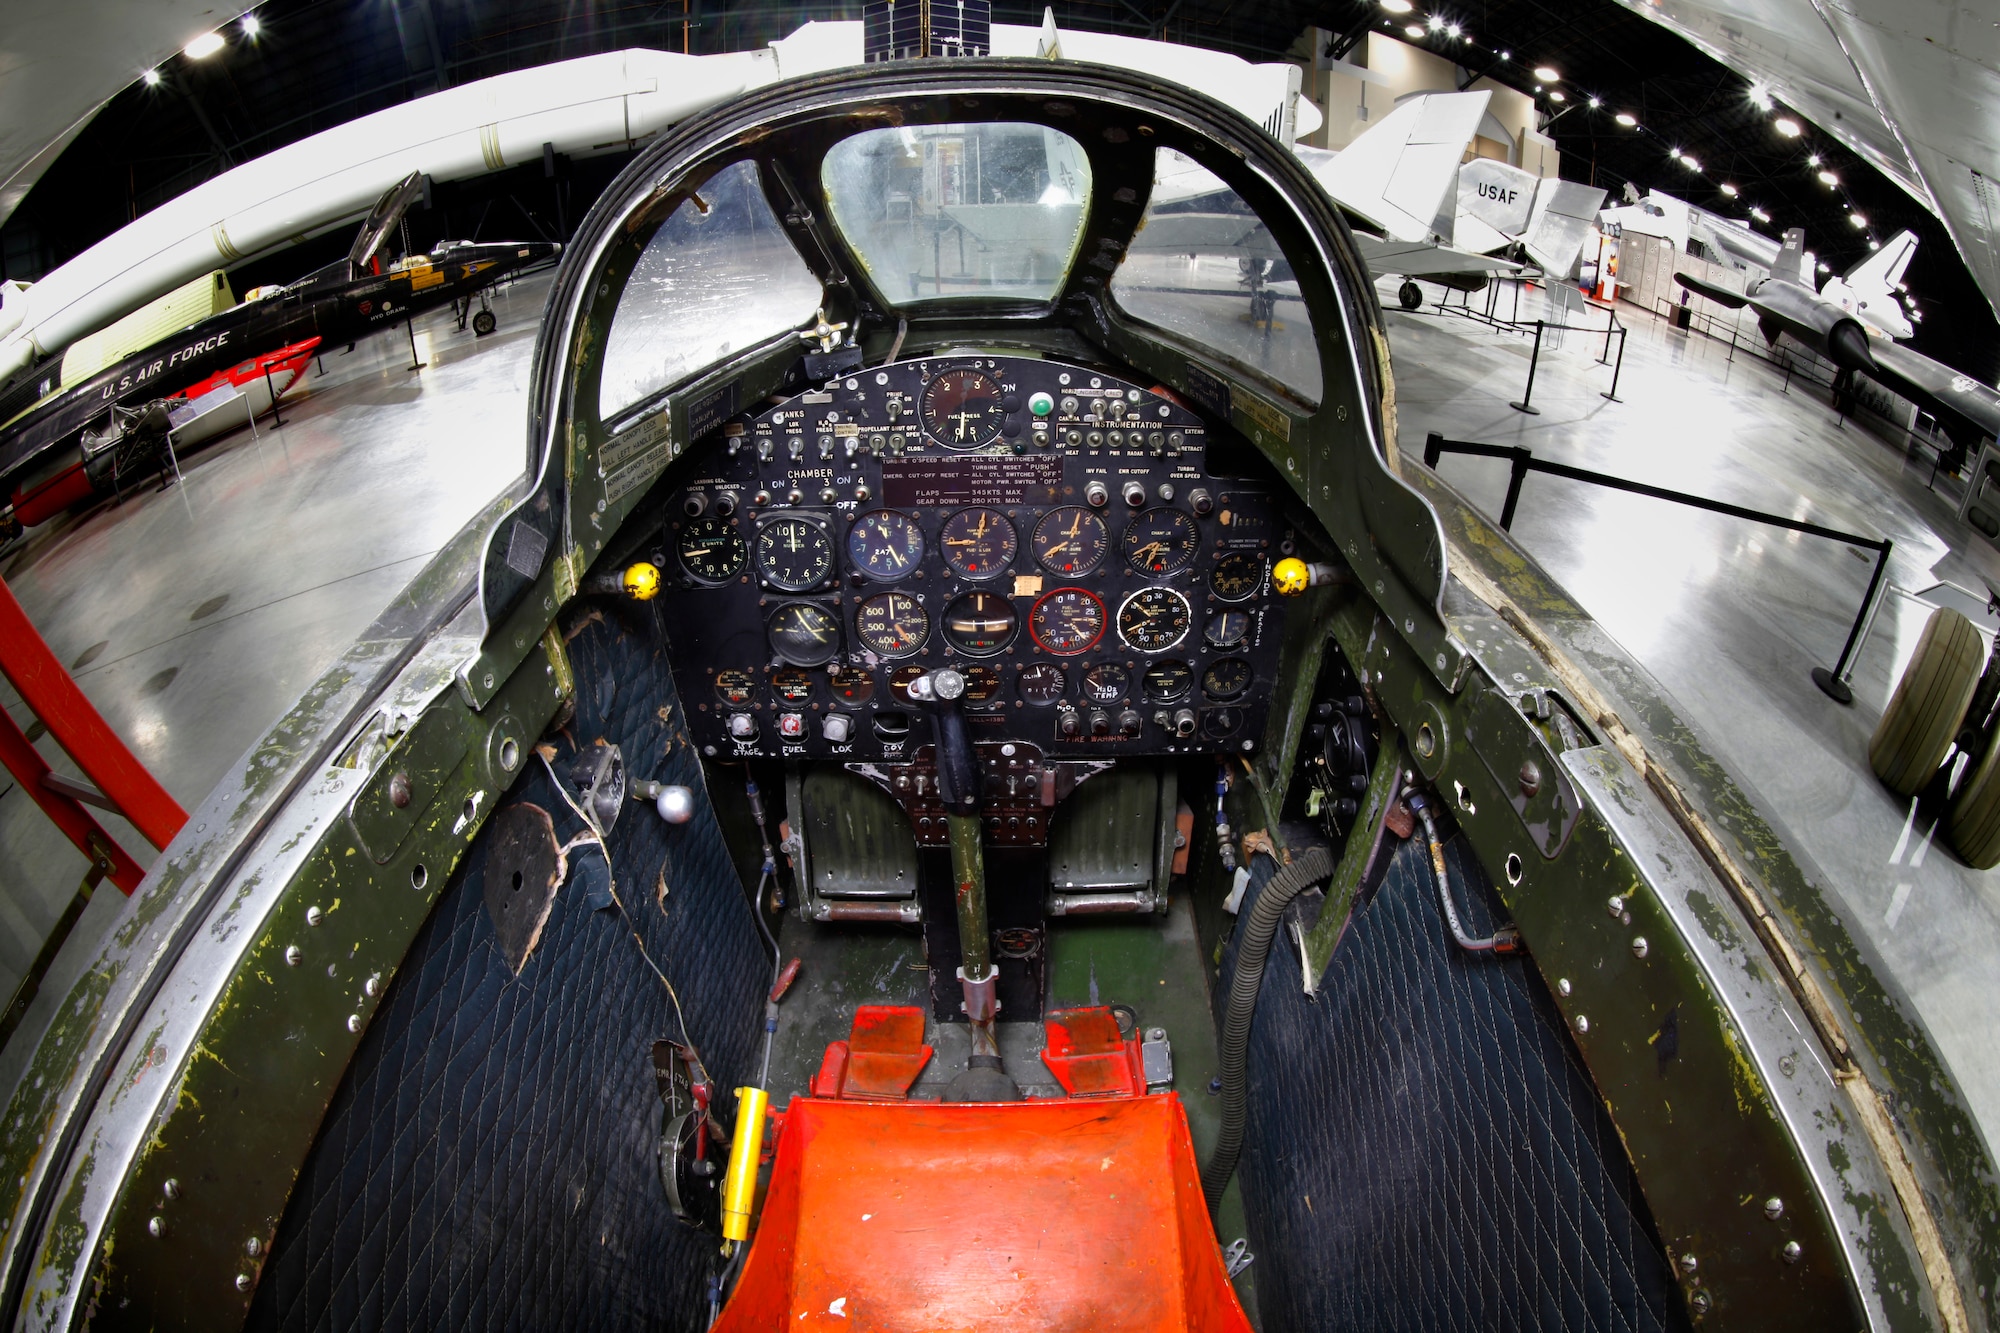 Interior views of the Bell X-1B on display in the National Museum of the U.S. Air Force Research and Development Gallery.